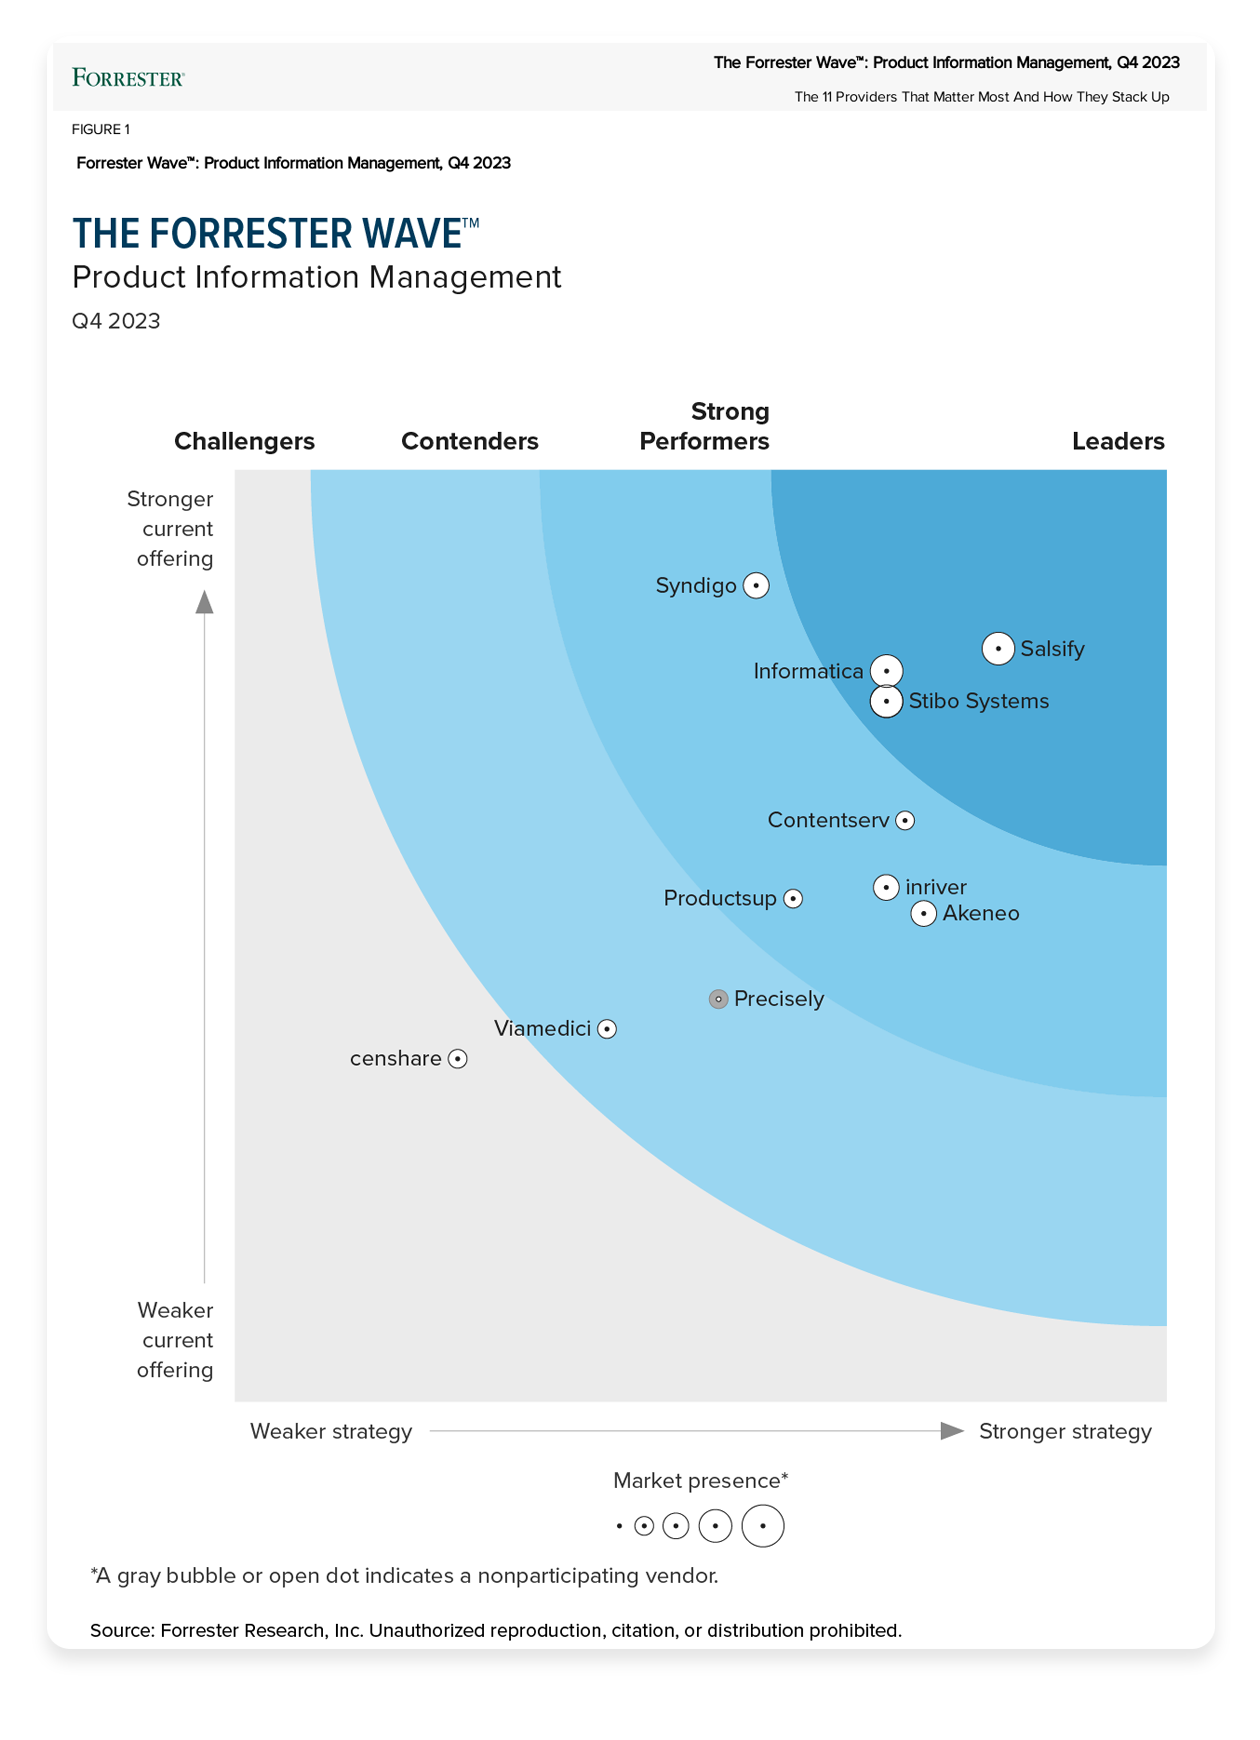 Salsify Named a Leader in The Forrester Wave Product Information Management Q4 2023 Report - graphic-1